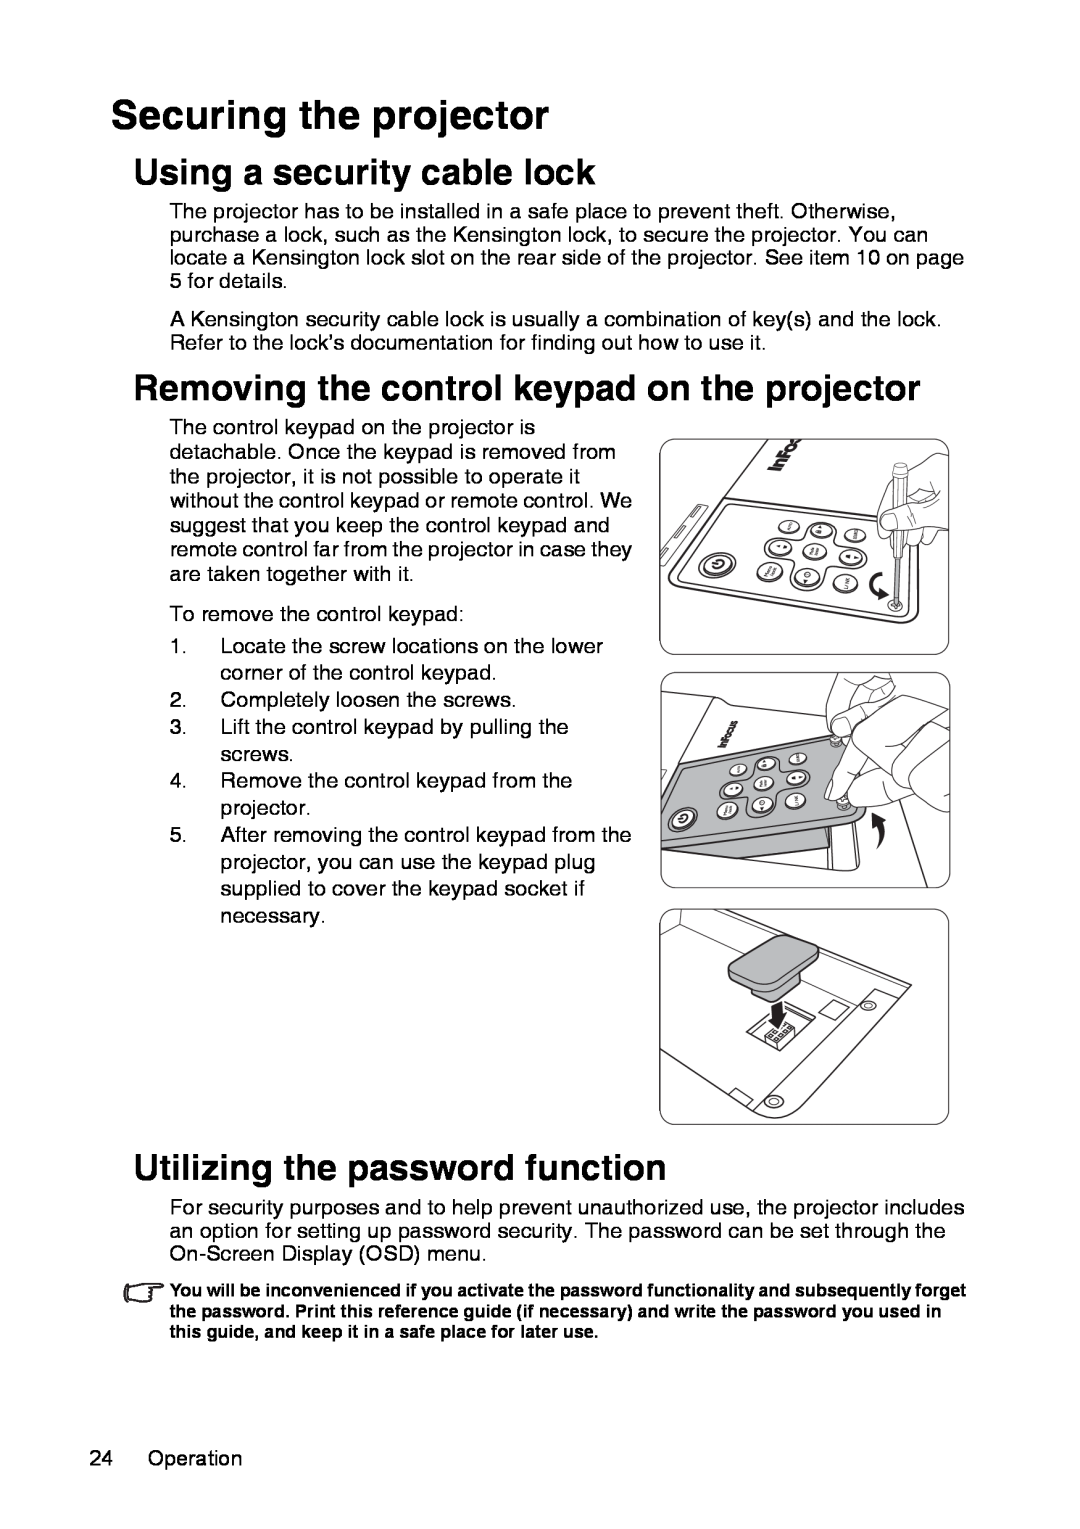 InFocus XS1 manual Securing the projector, Using a security cable lock, Removing the control keypad on the projector 